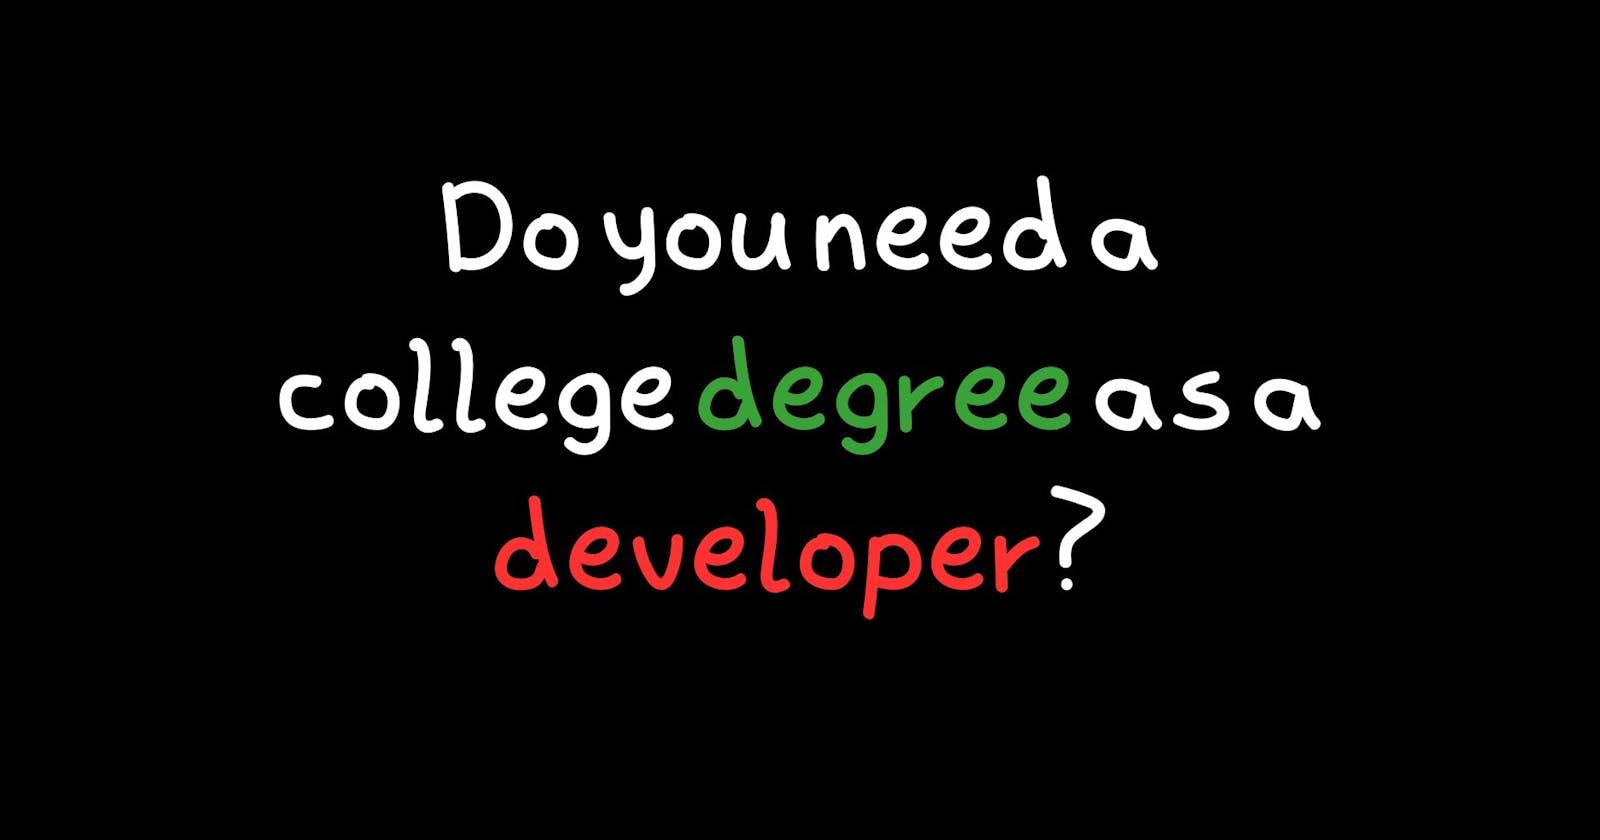 Do you need a college degree as a developer?